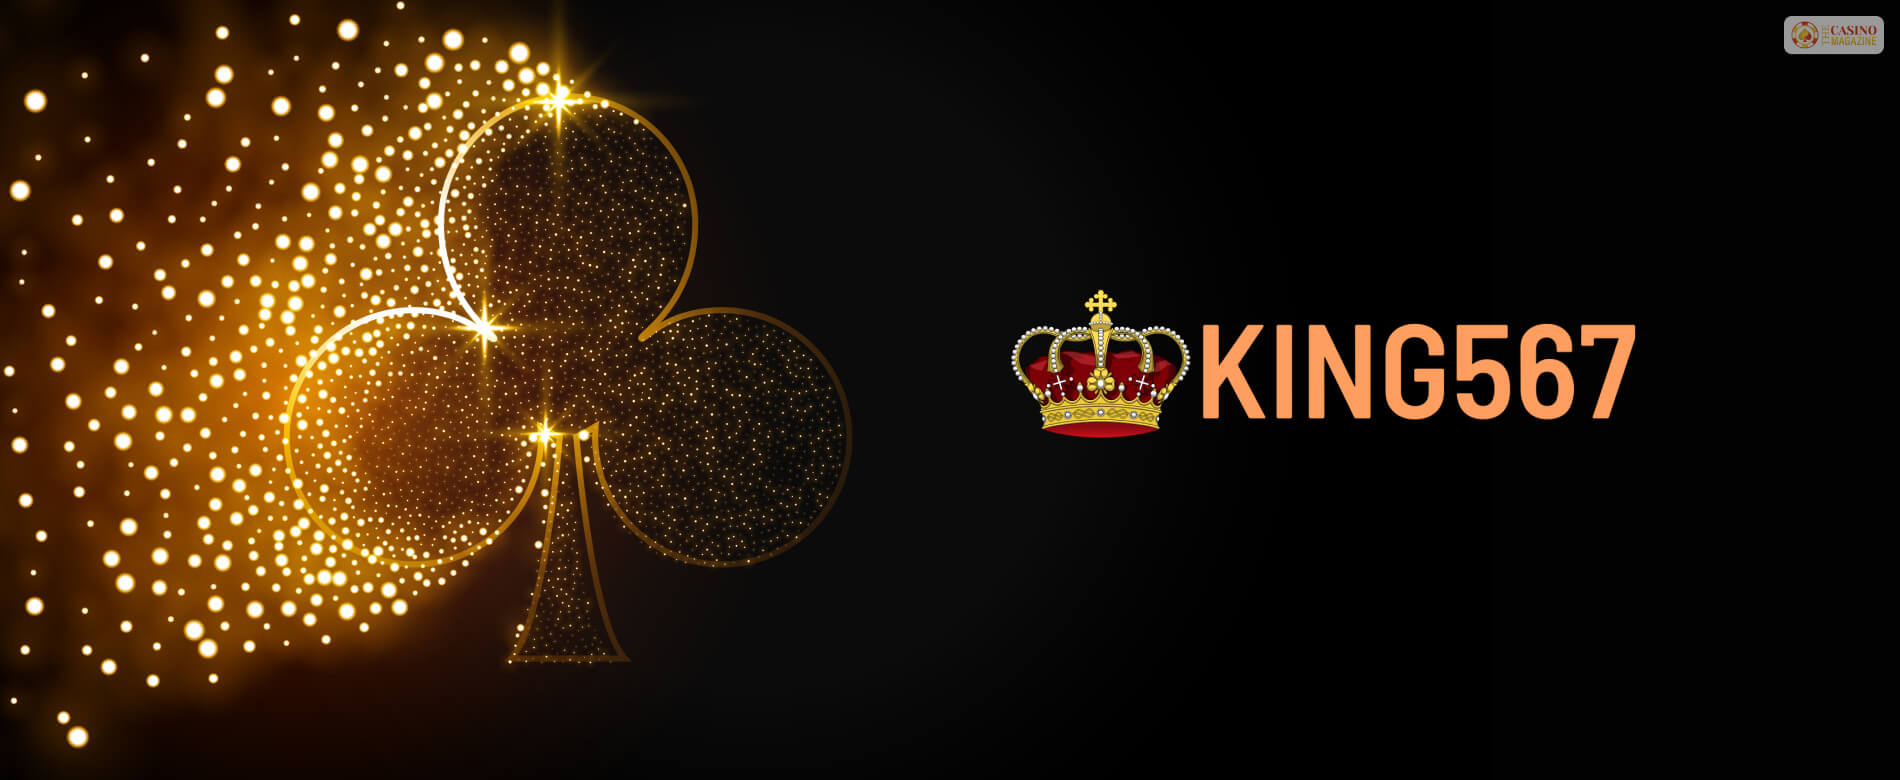 King567 Casino Review - Is It Safe